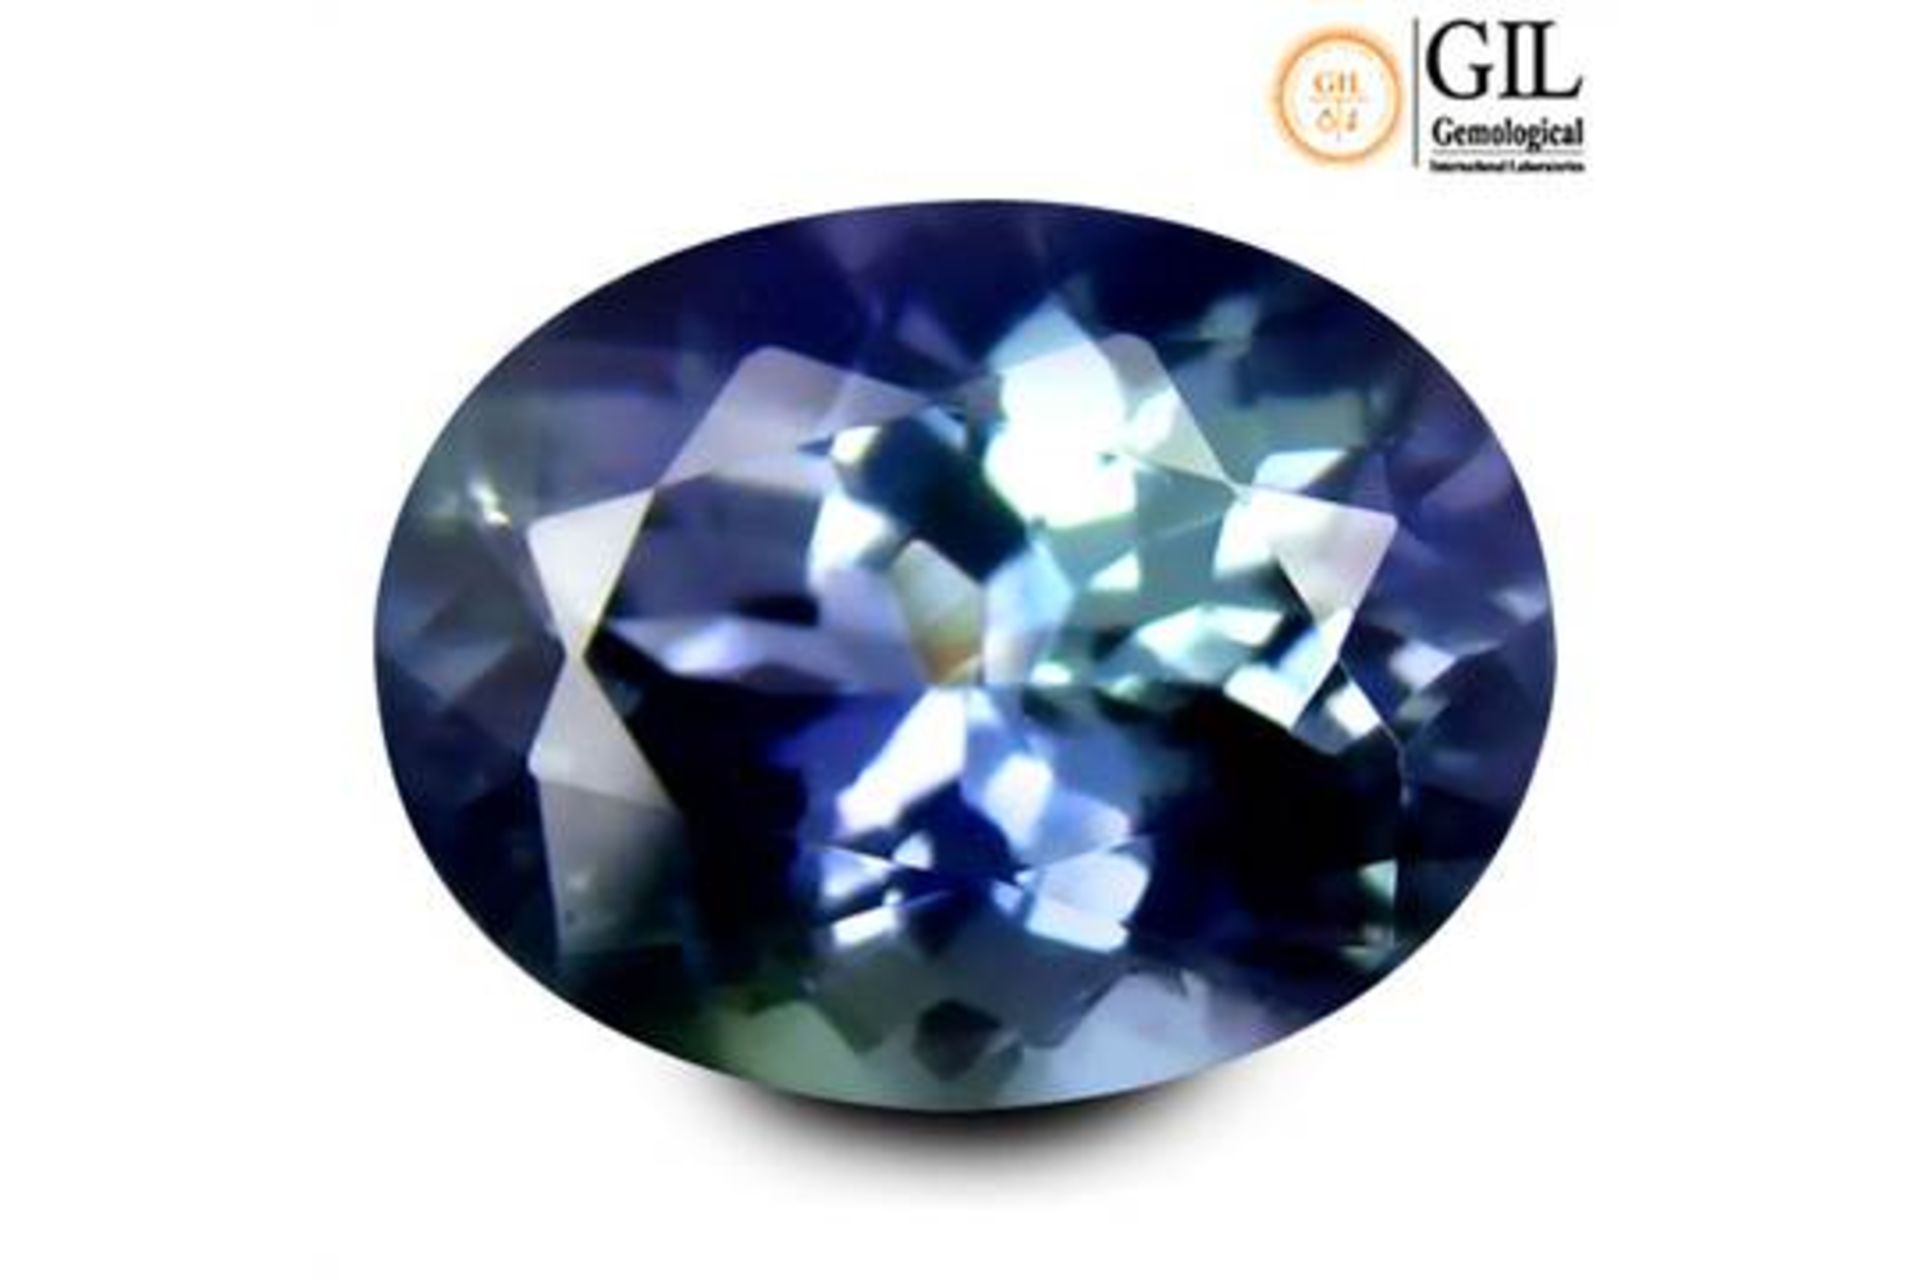 A Fantastic GIL Certified 2.25ct Oval Facetted Cut Natural Tanzanite Investment Gemstone, Retail